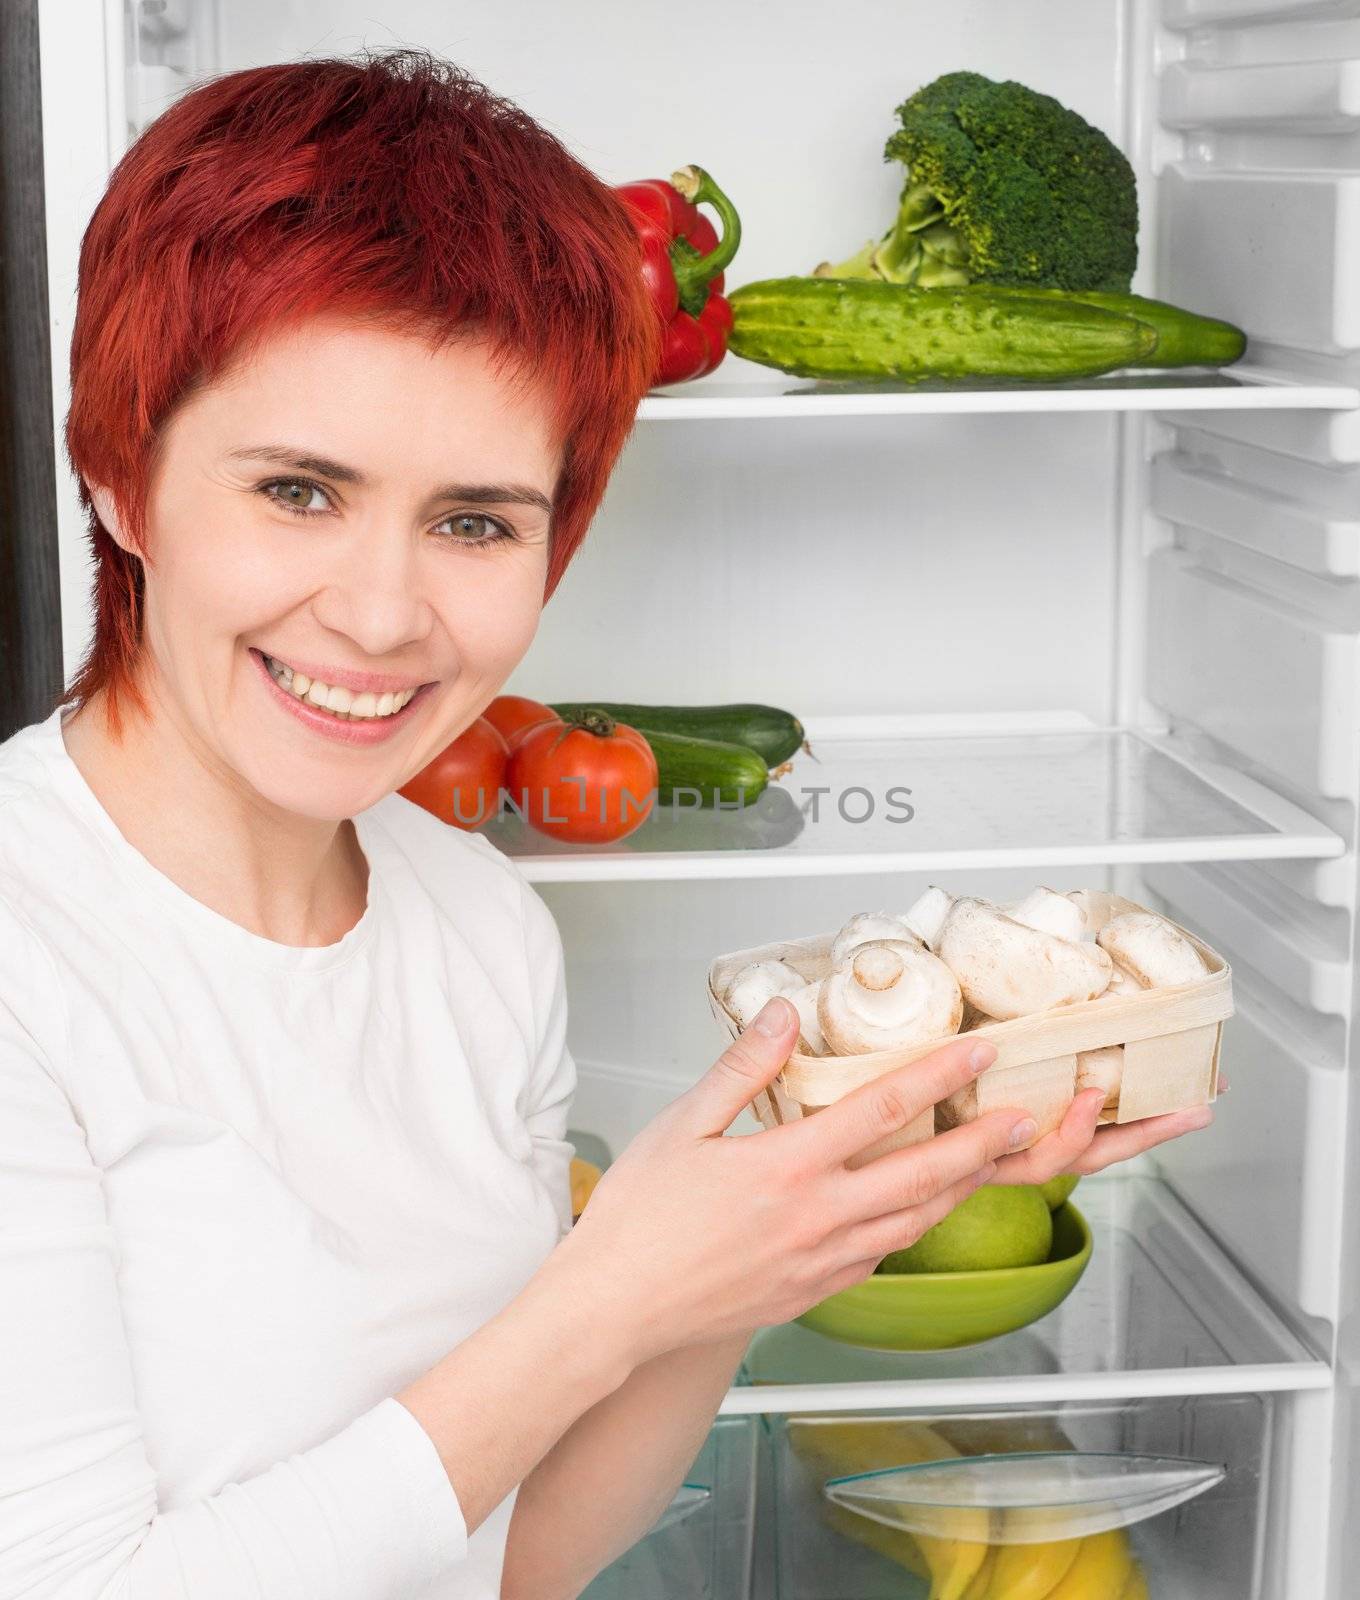 young woman with mushroom against the refrigerator with food